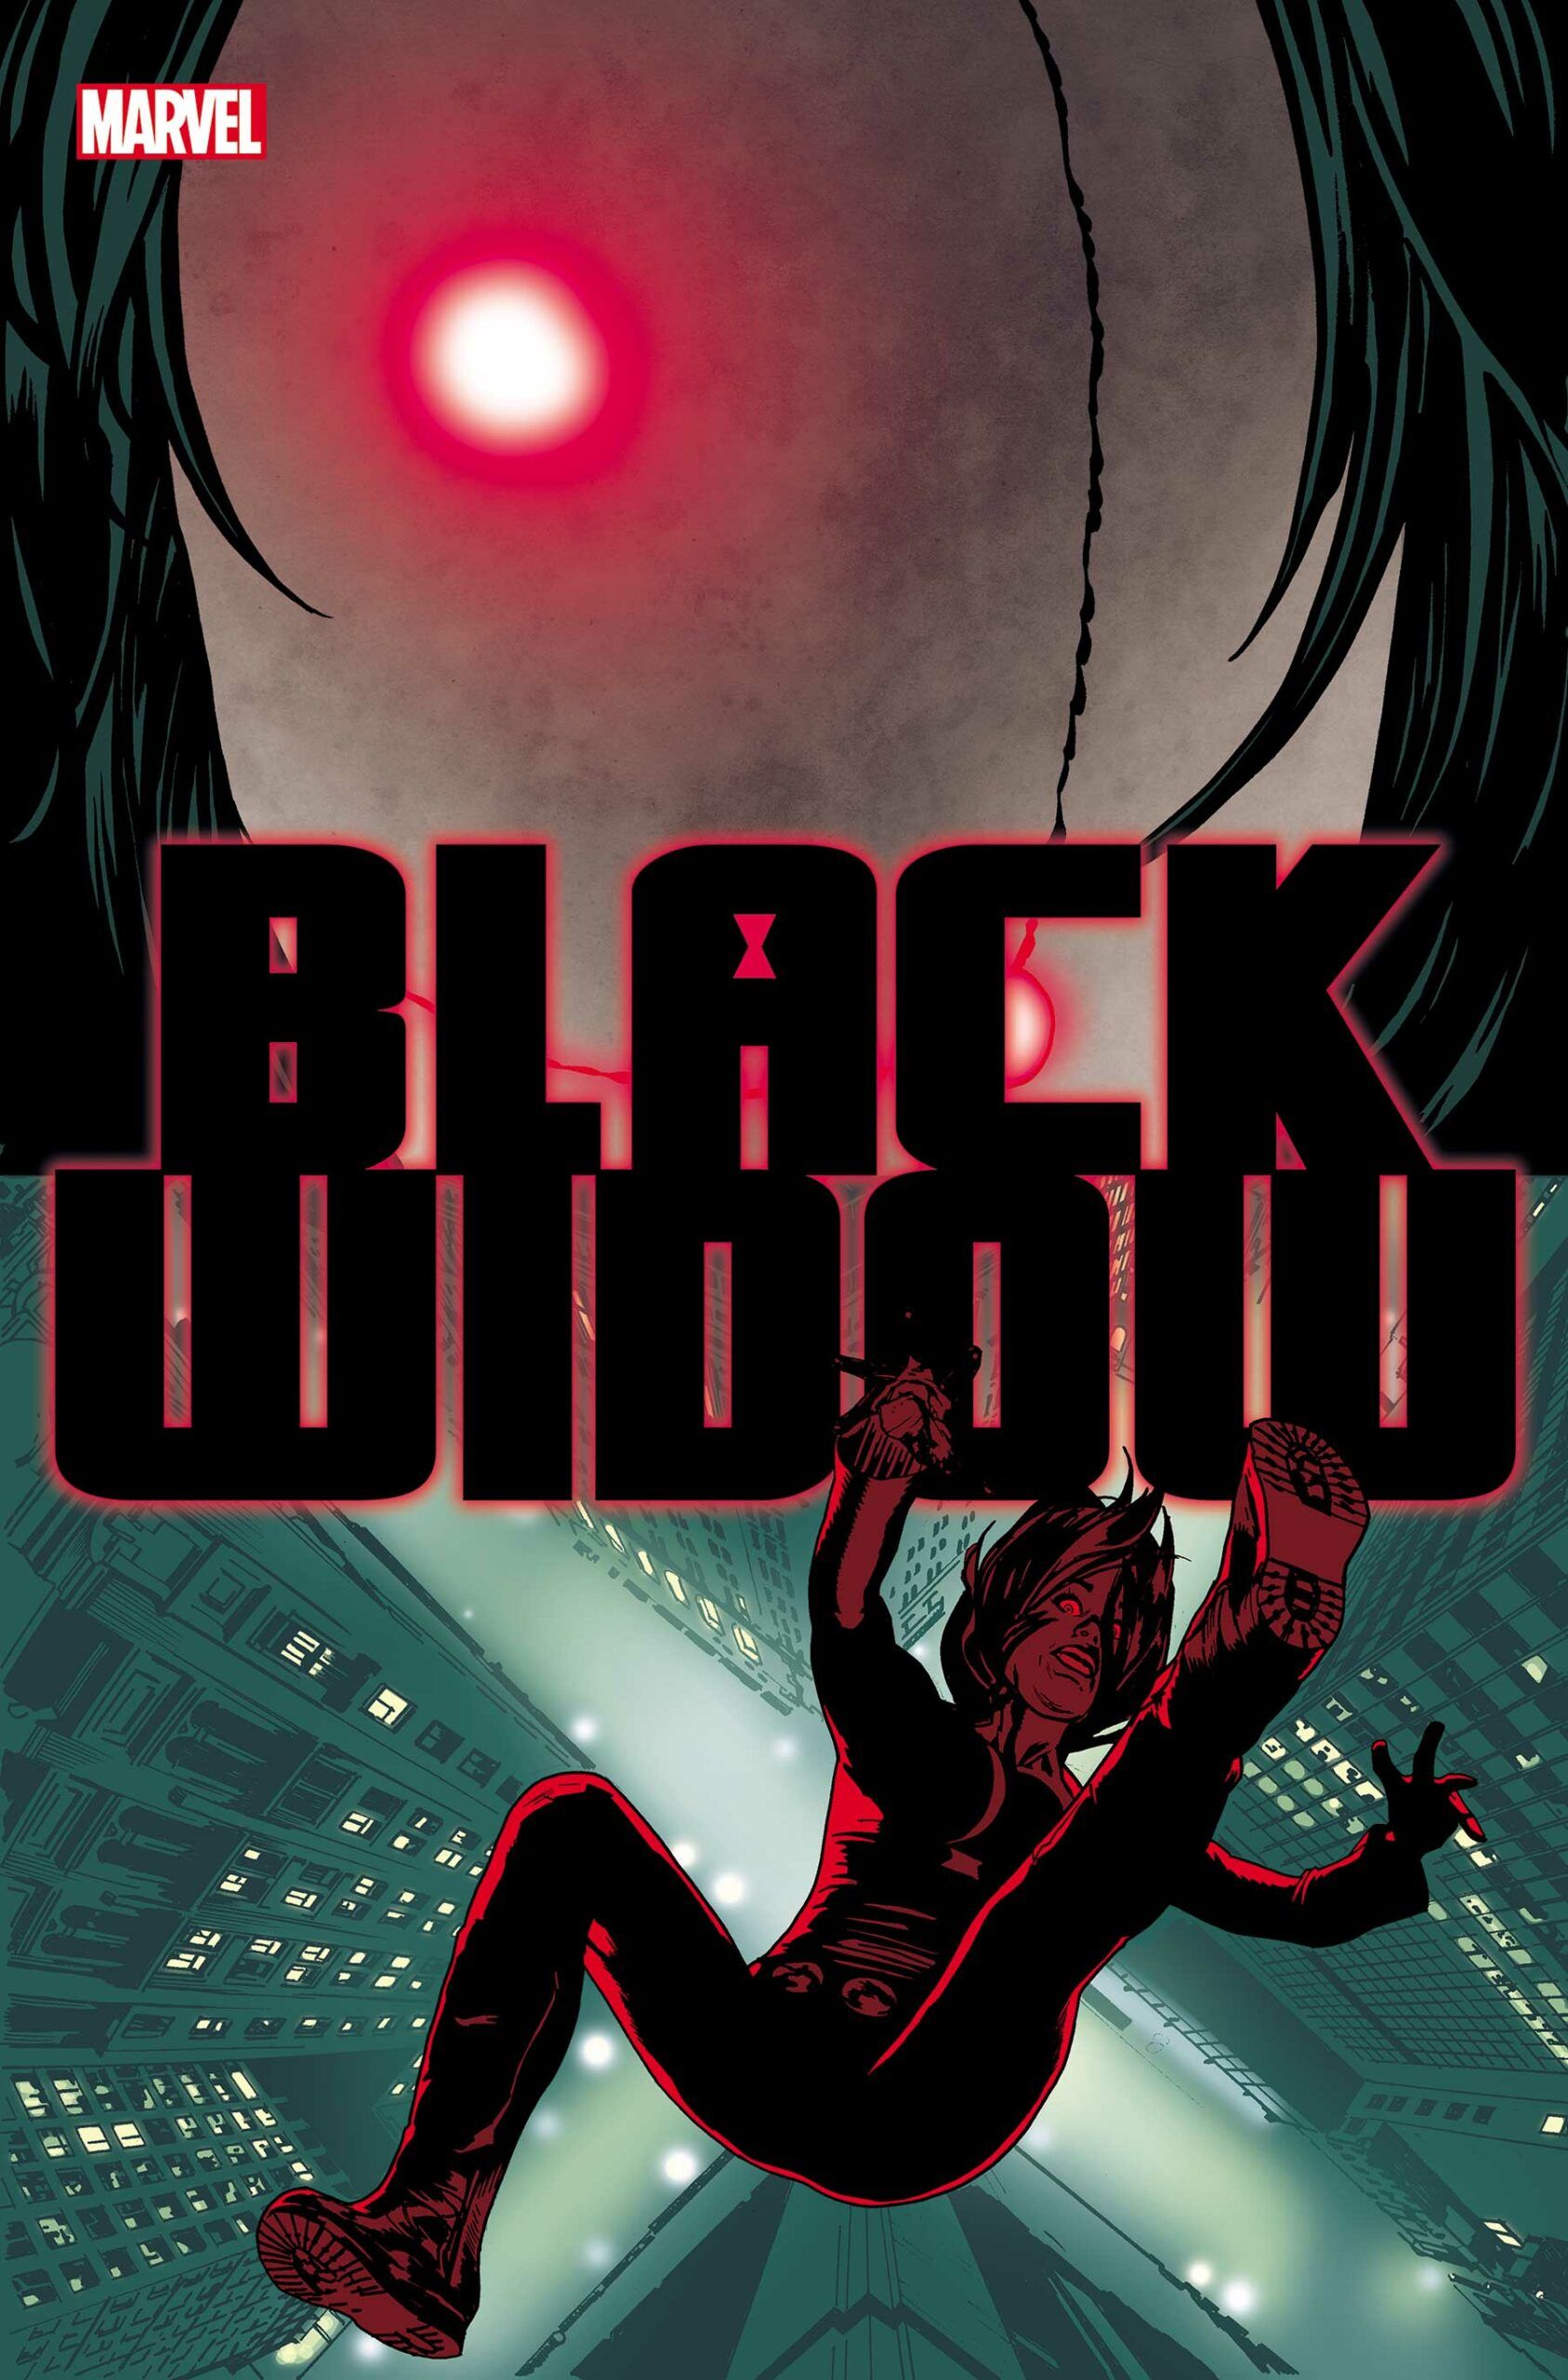 Black Widow Issue 8 Cover